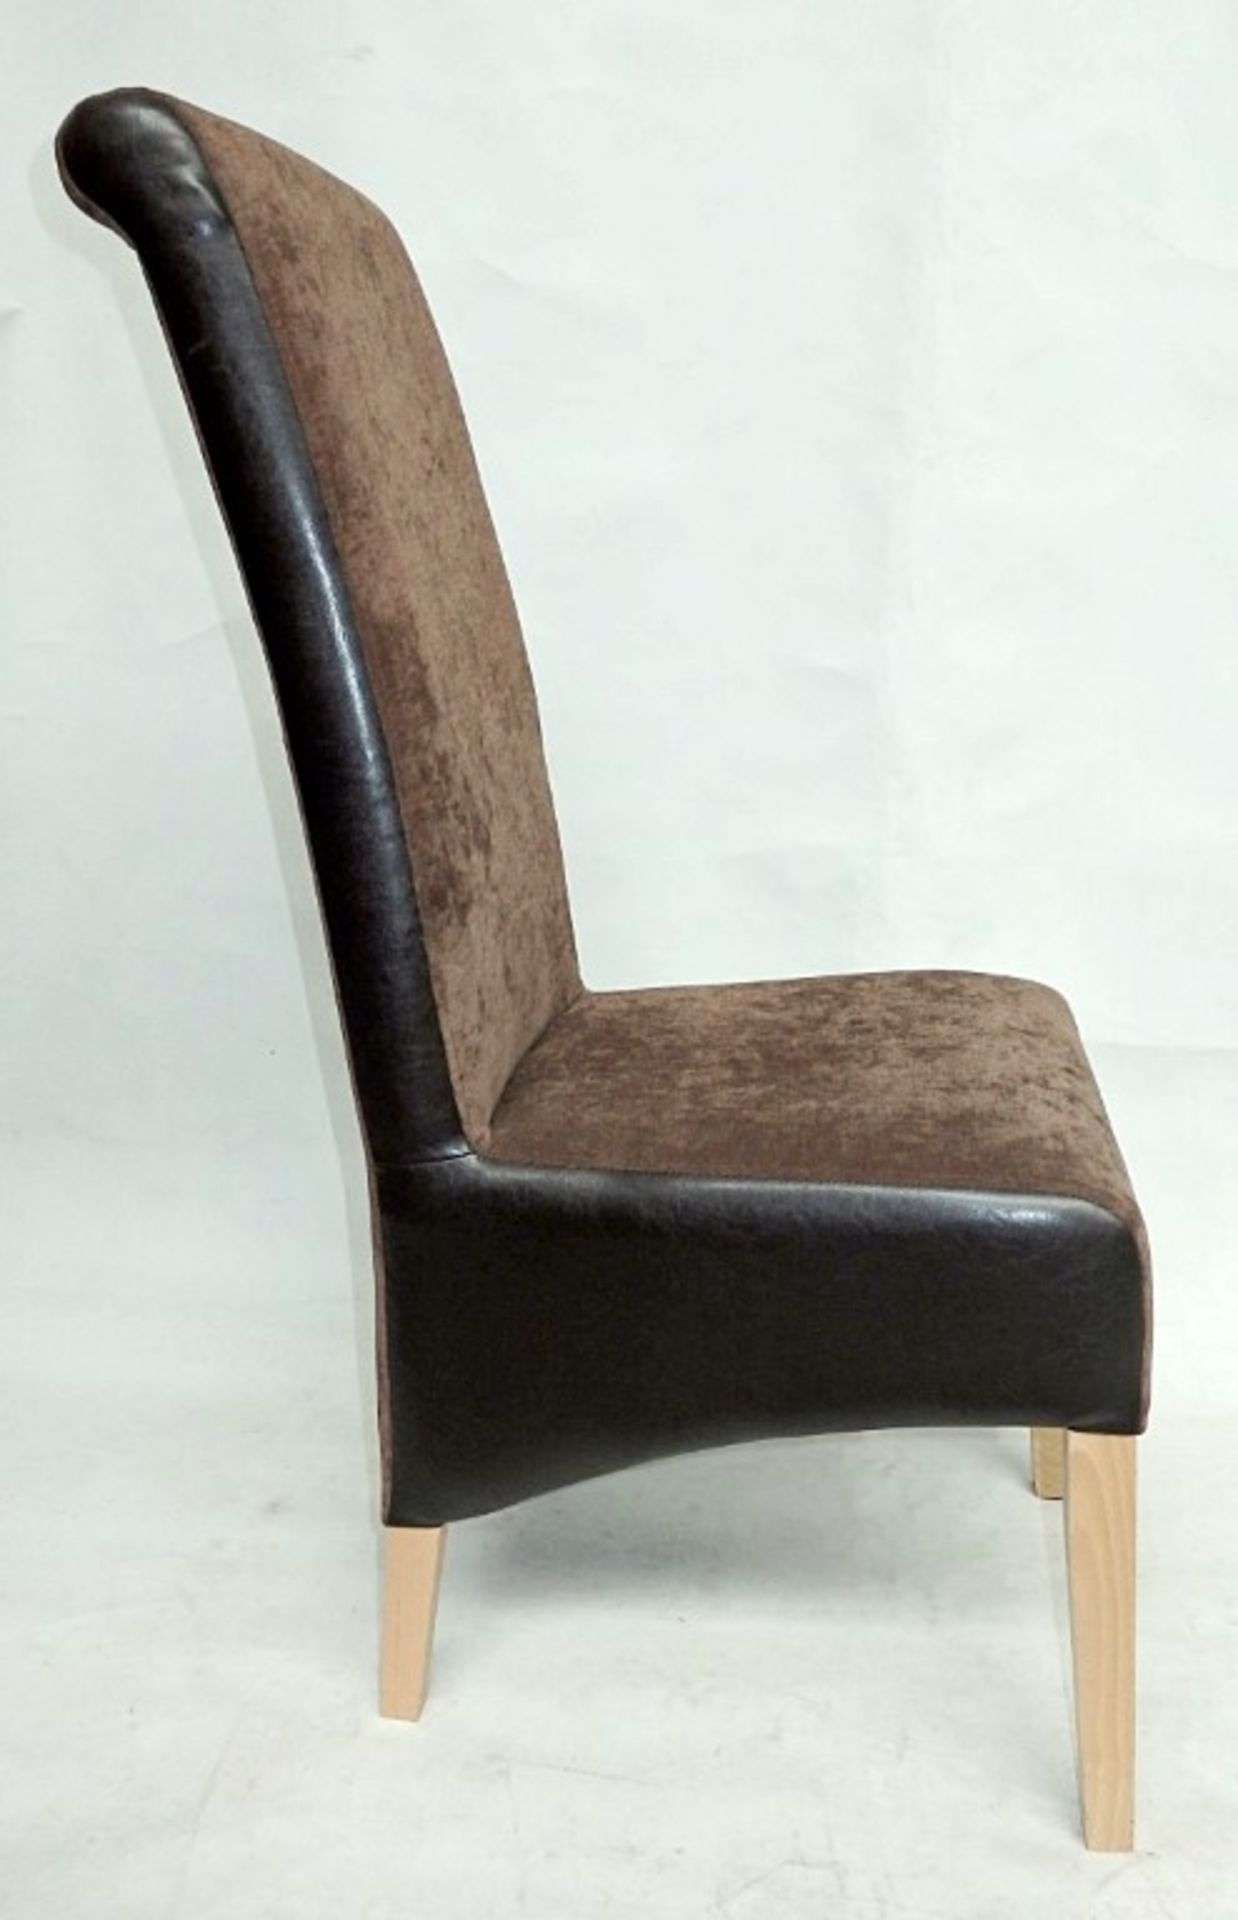 1 x Bespoke Highback Chair In A Rich Brown Chenile - Built And Upholstered By Professional British - Image 3 of 16